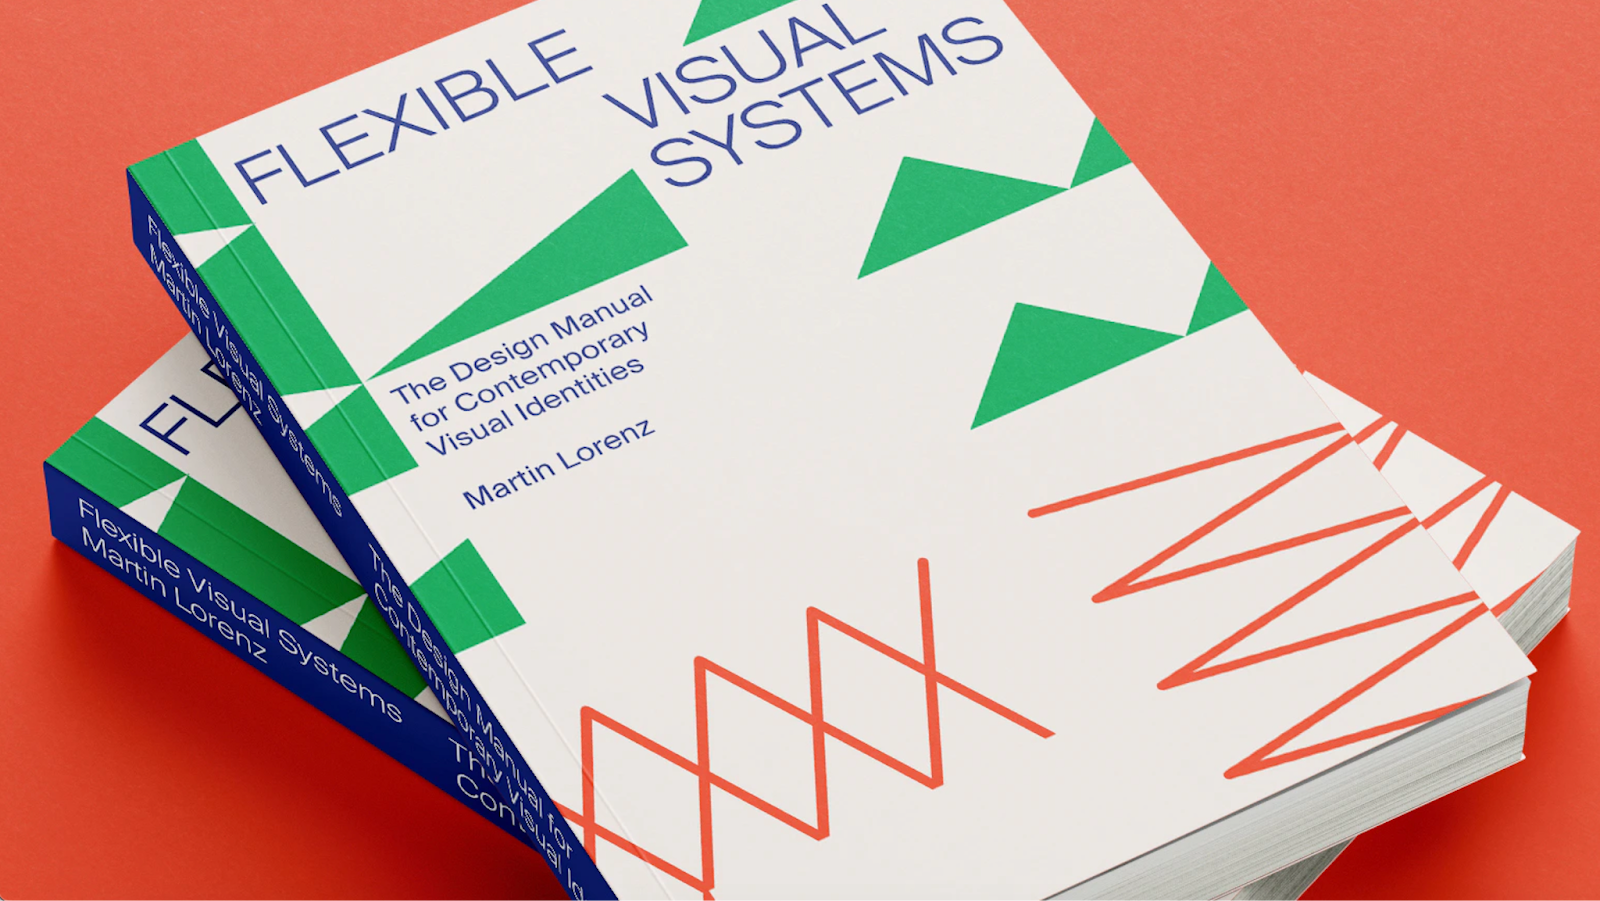 Flexible Visual Systems by Martin Lorenz 